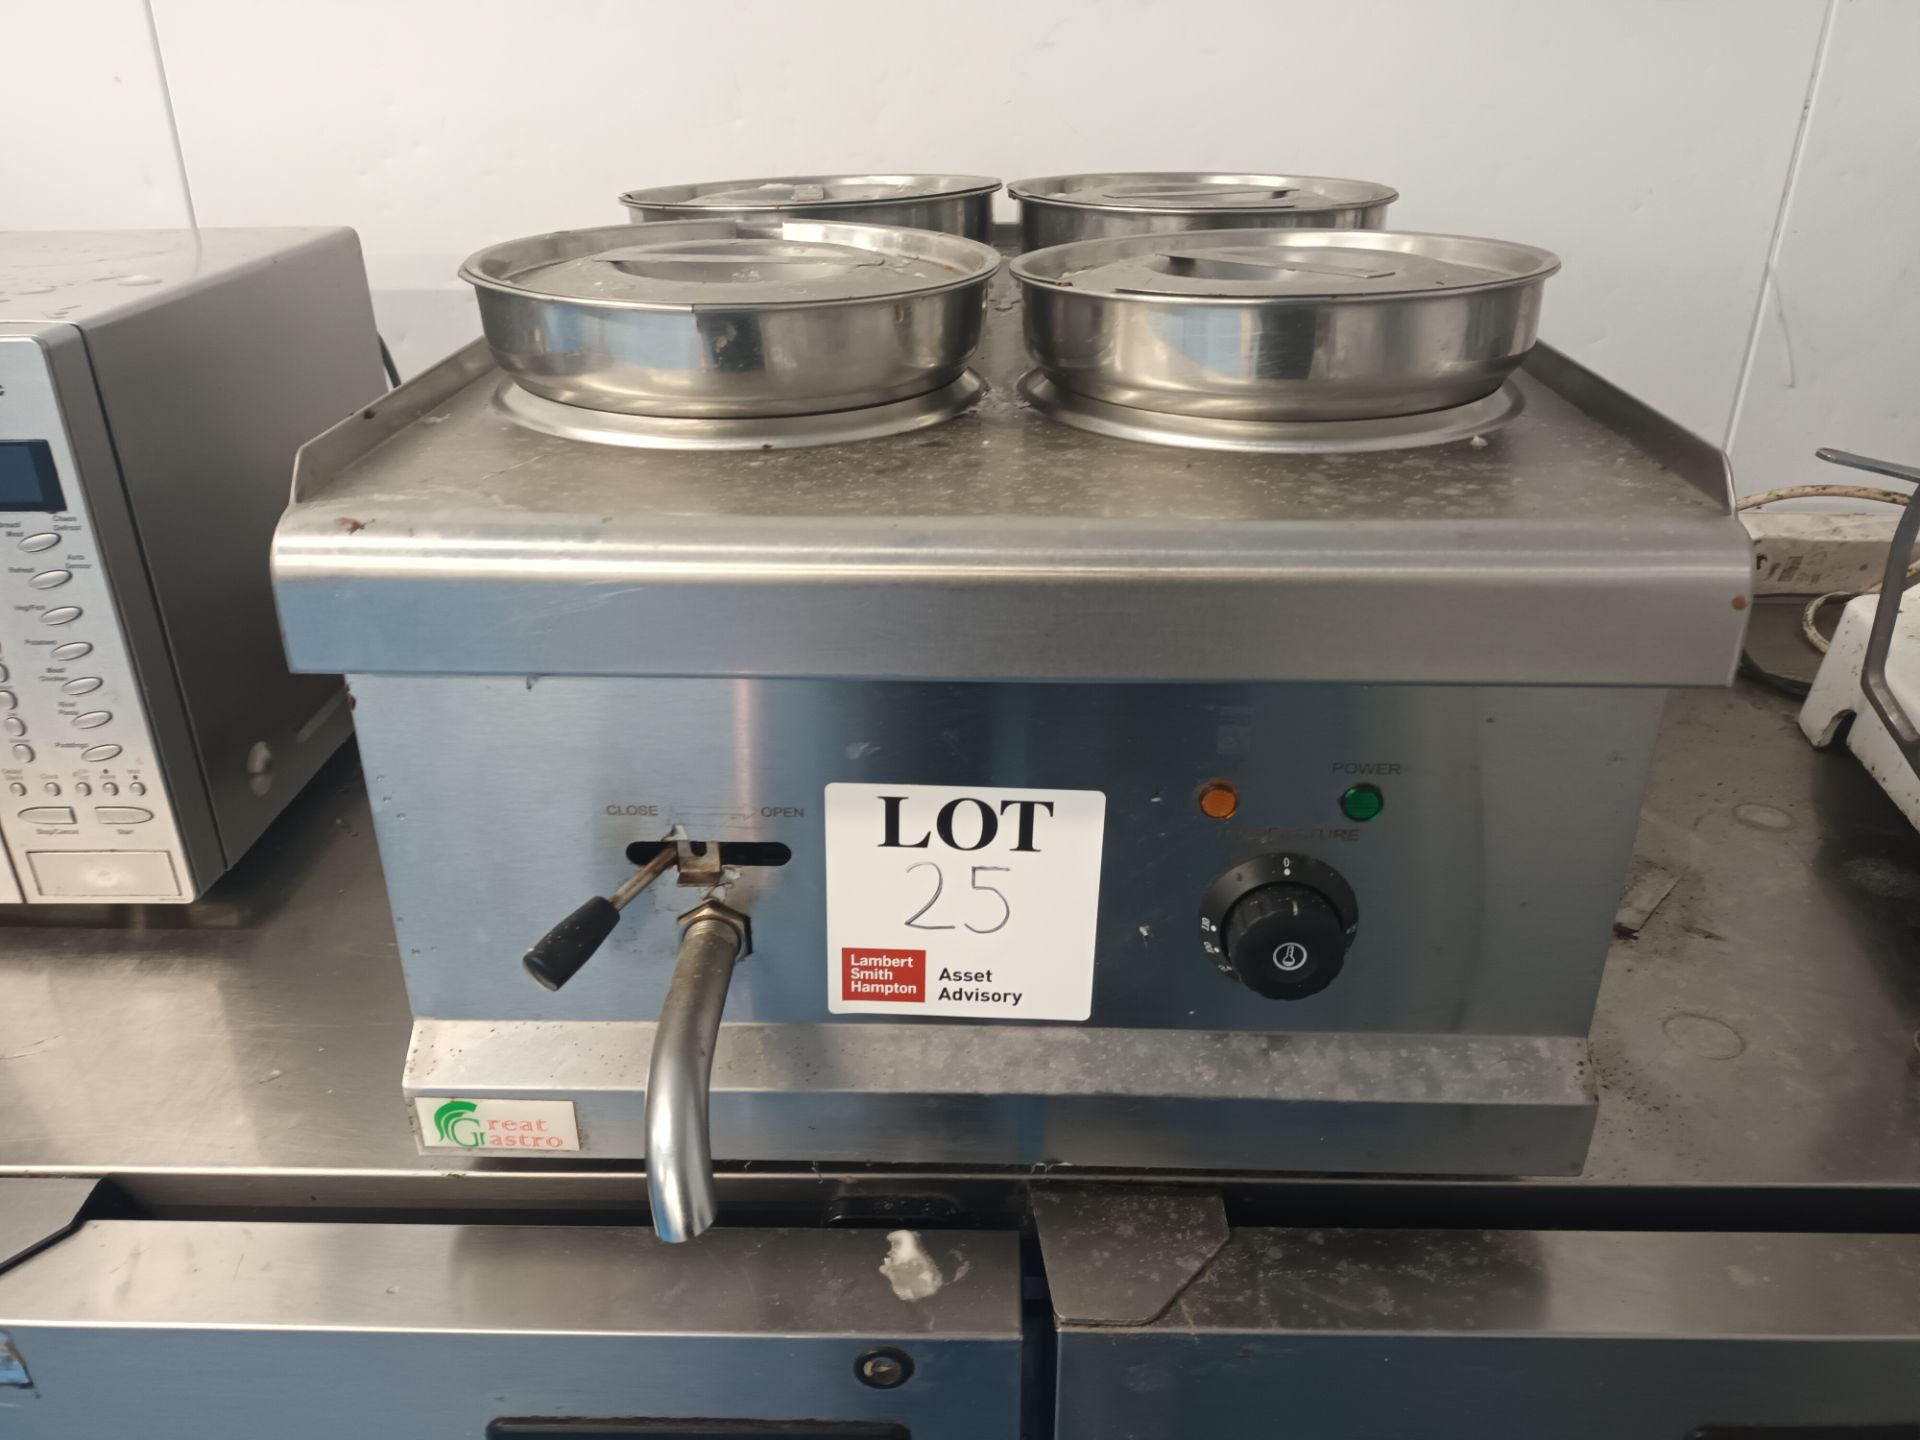 Great Gastro EH-4B stainless steel bain marie, 220v